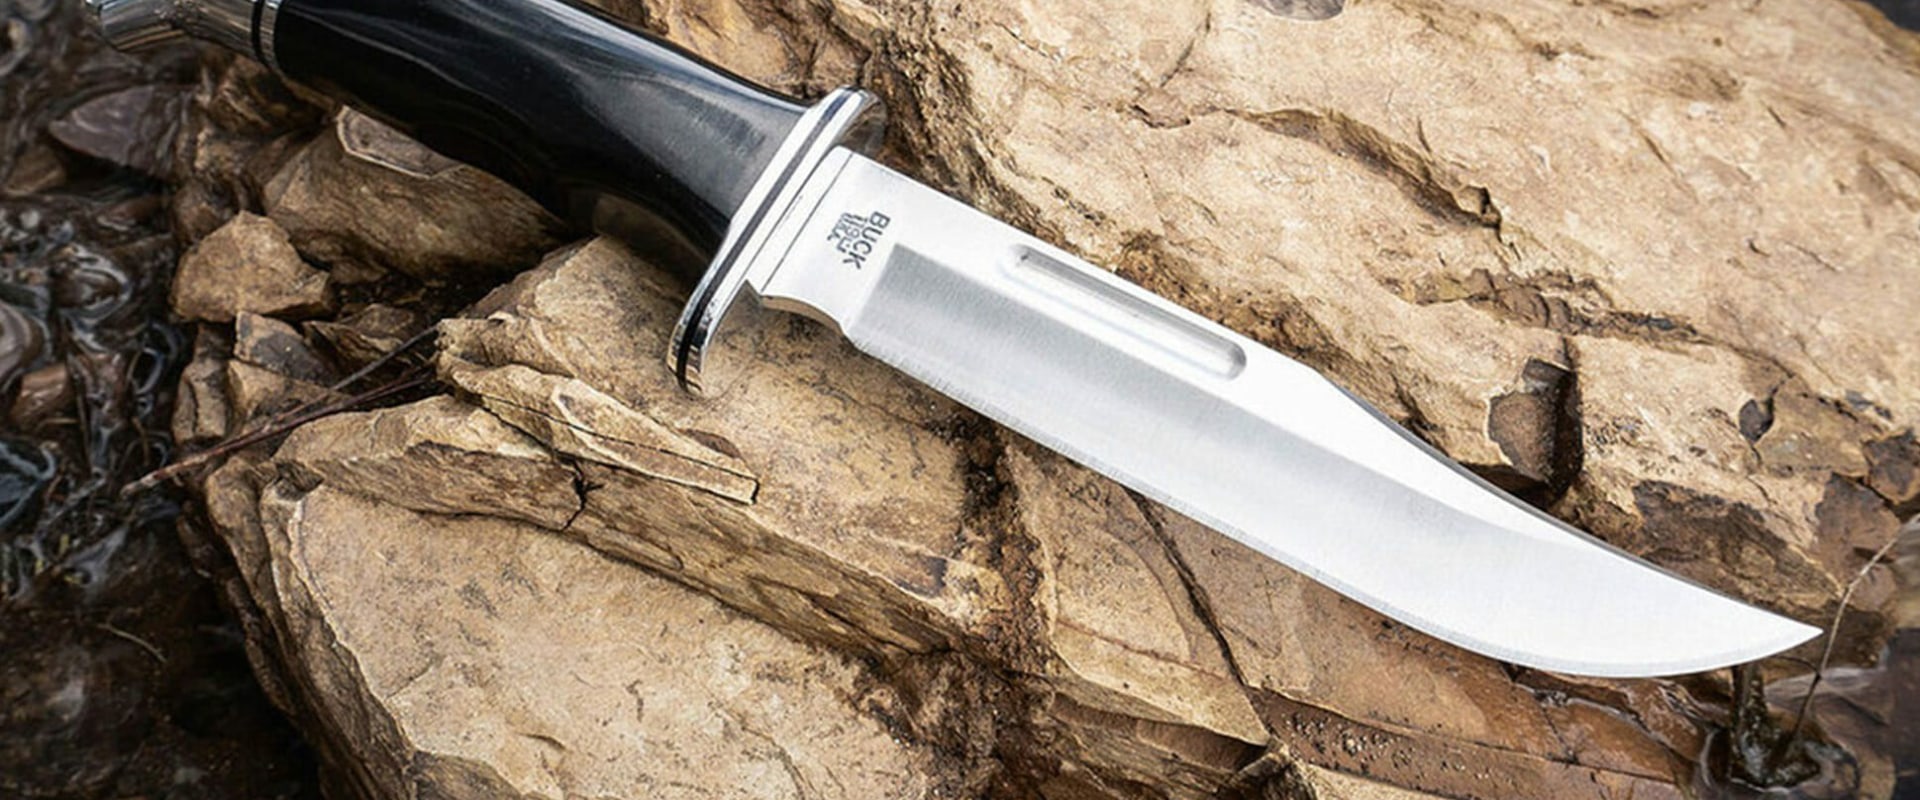 The Best Knife Companies in the World